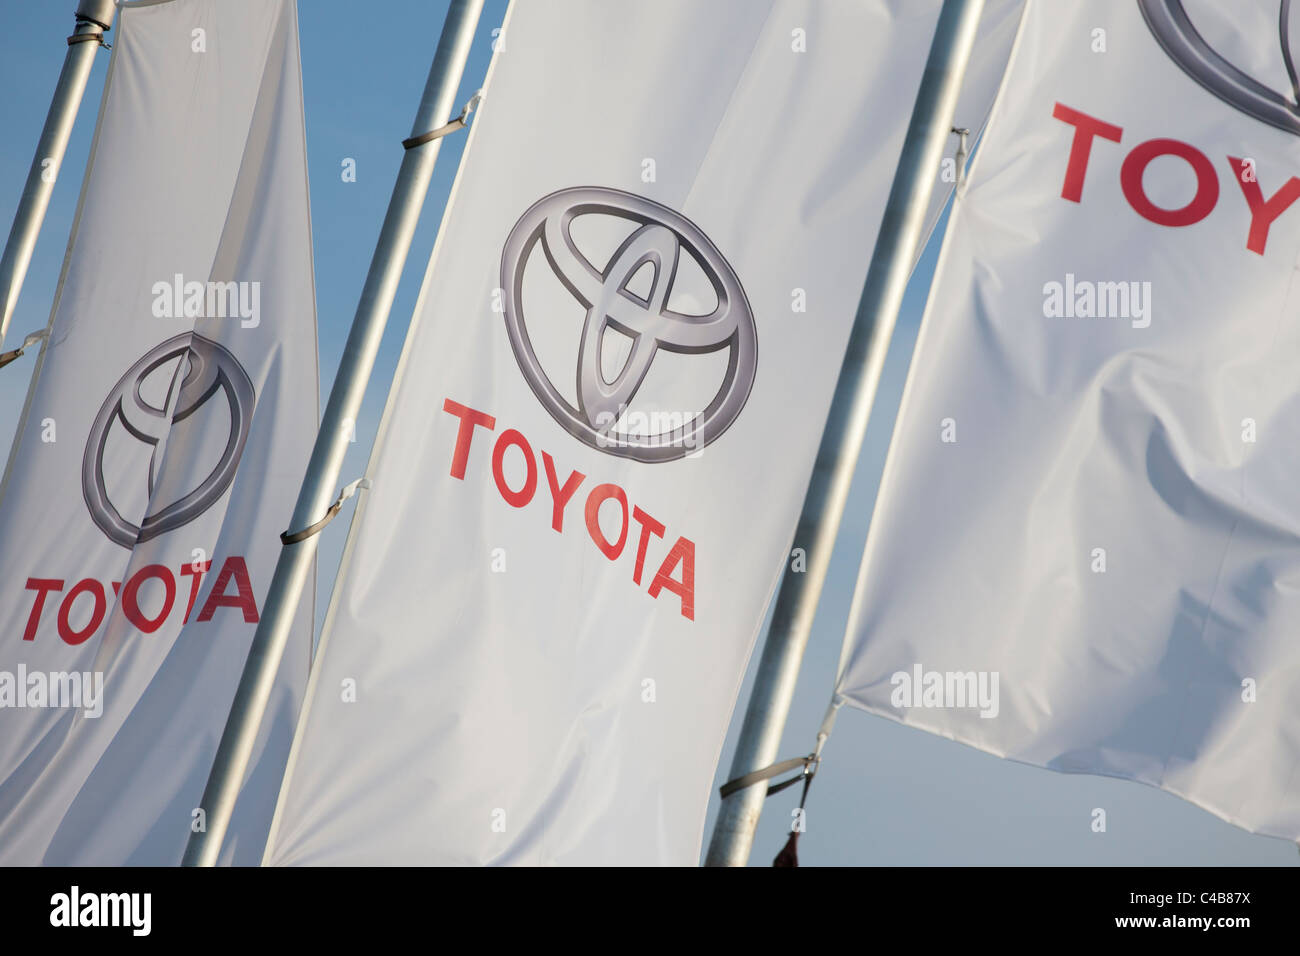 White Toyota brand flags on metal poles waving against a clear blue sky, showcasing the red Toyota logo and lettering Stock Photo